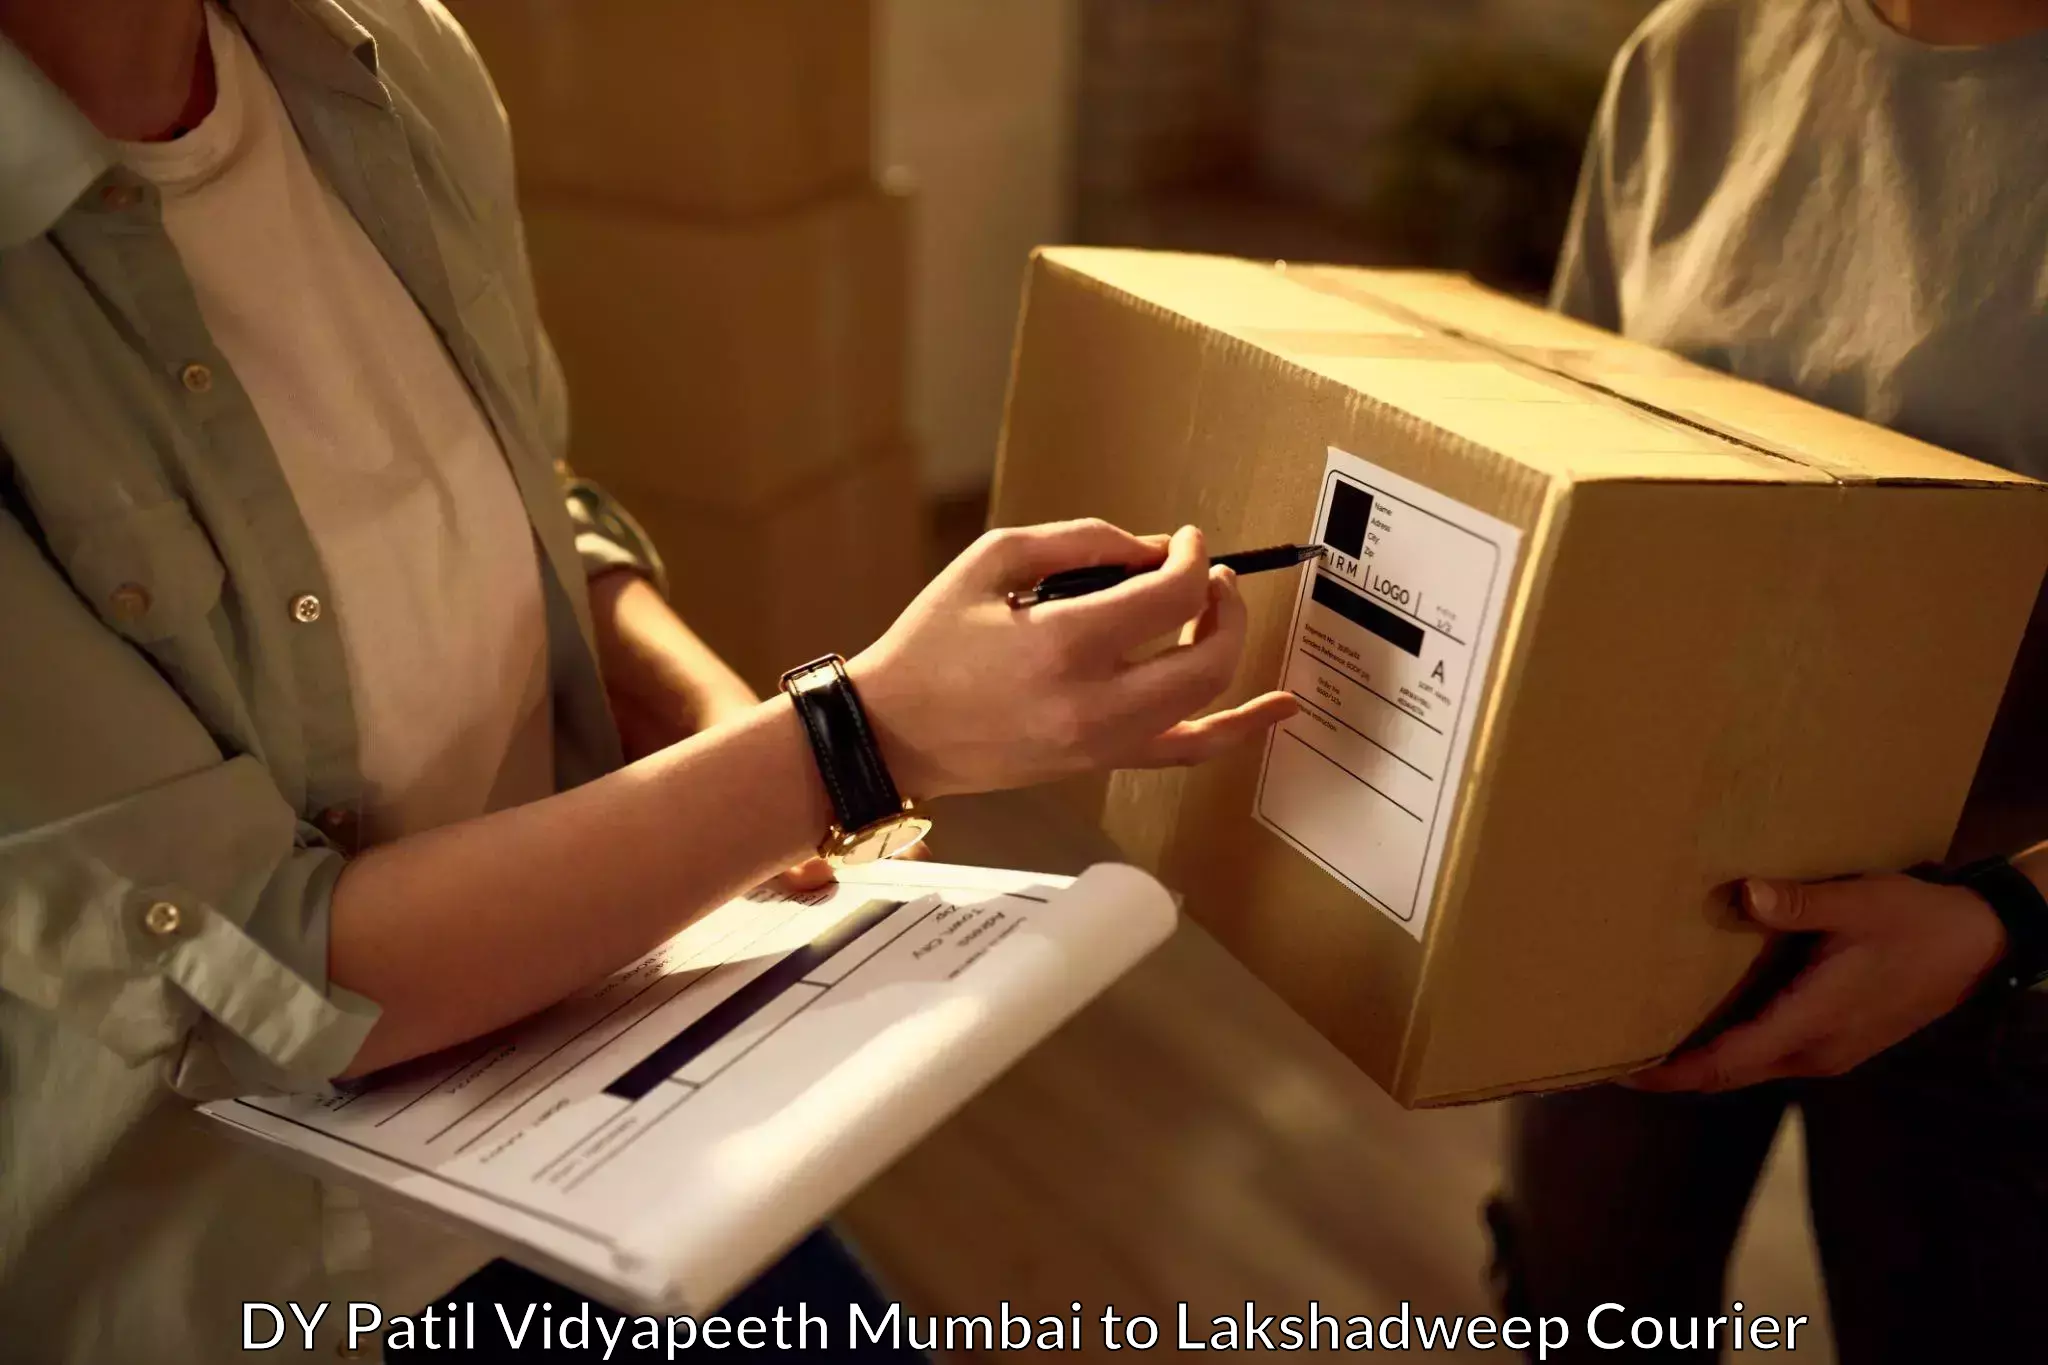 Rural area delivery in DY Patil Vidyapeeth Mumbai to Lakshadweep